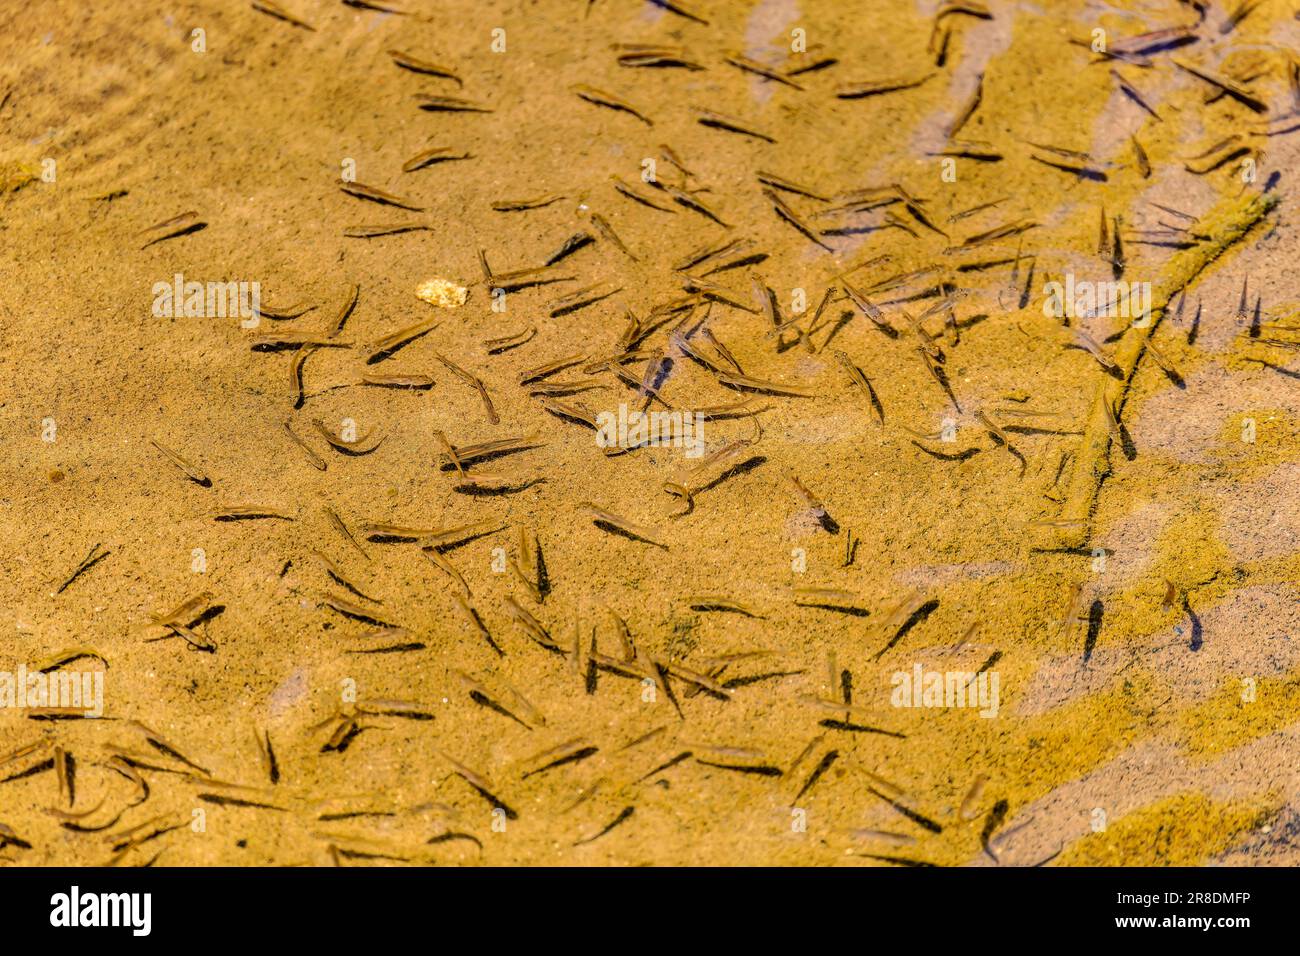 Minnow fish or salmon juvenile fish in the creek. Minnow is the